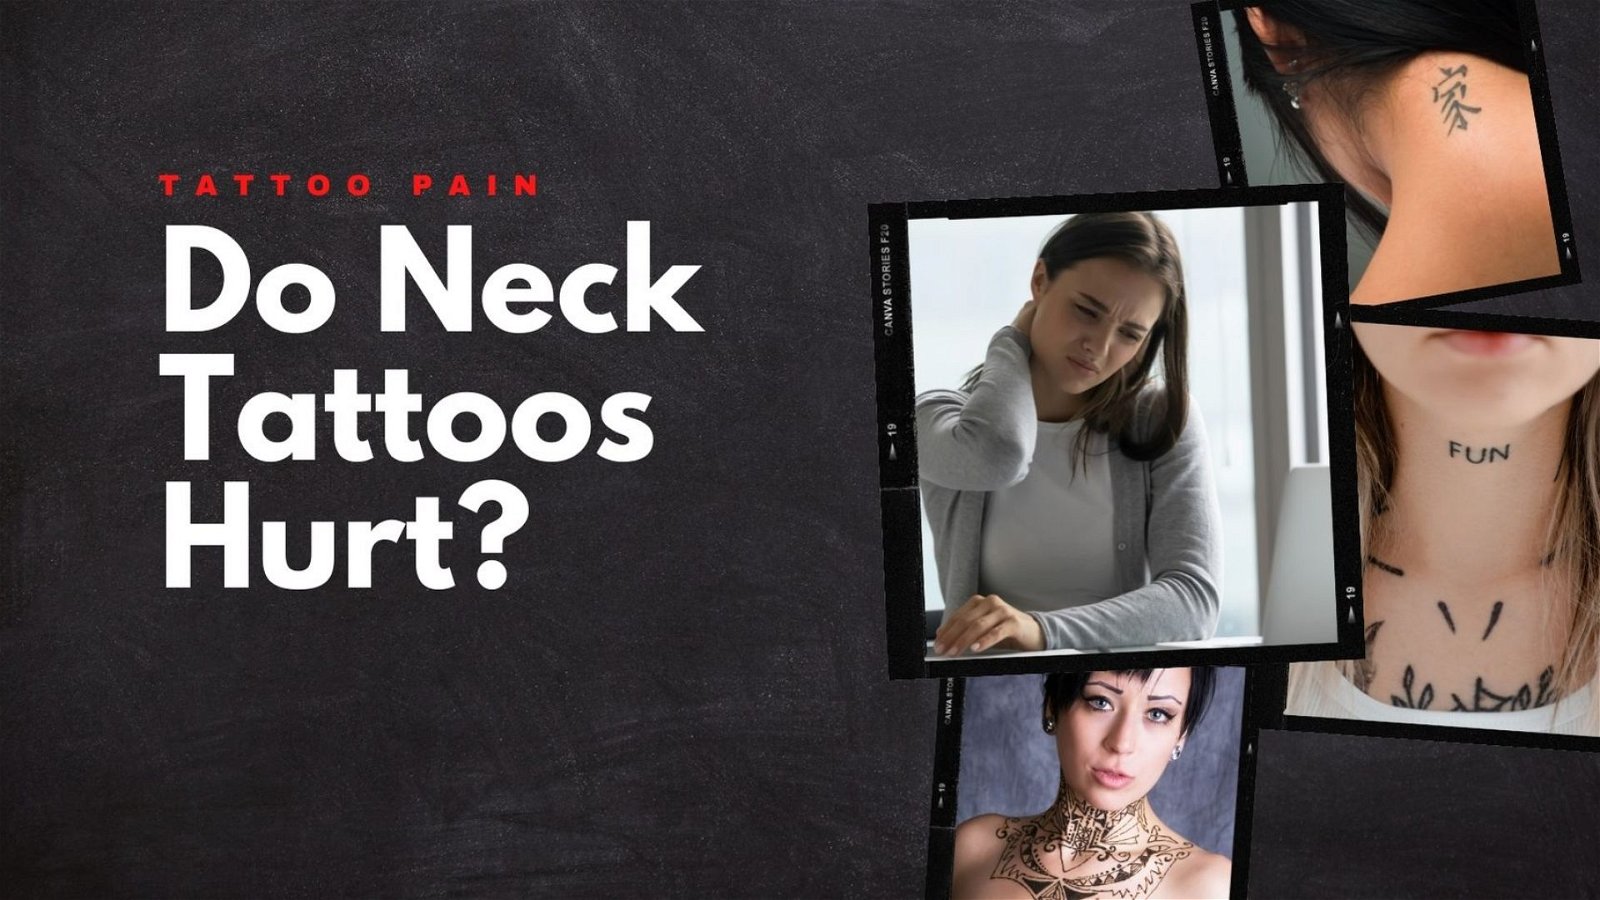 Behind The Ear Tattoo Pain: How Much Do They Hurt? - AuthorityTattoo